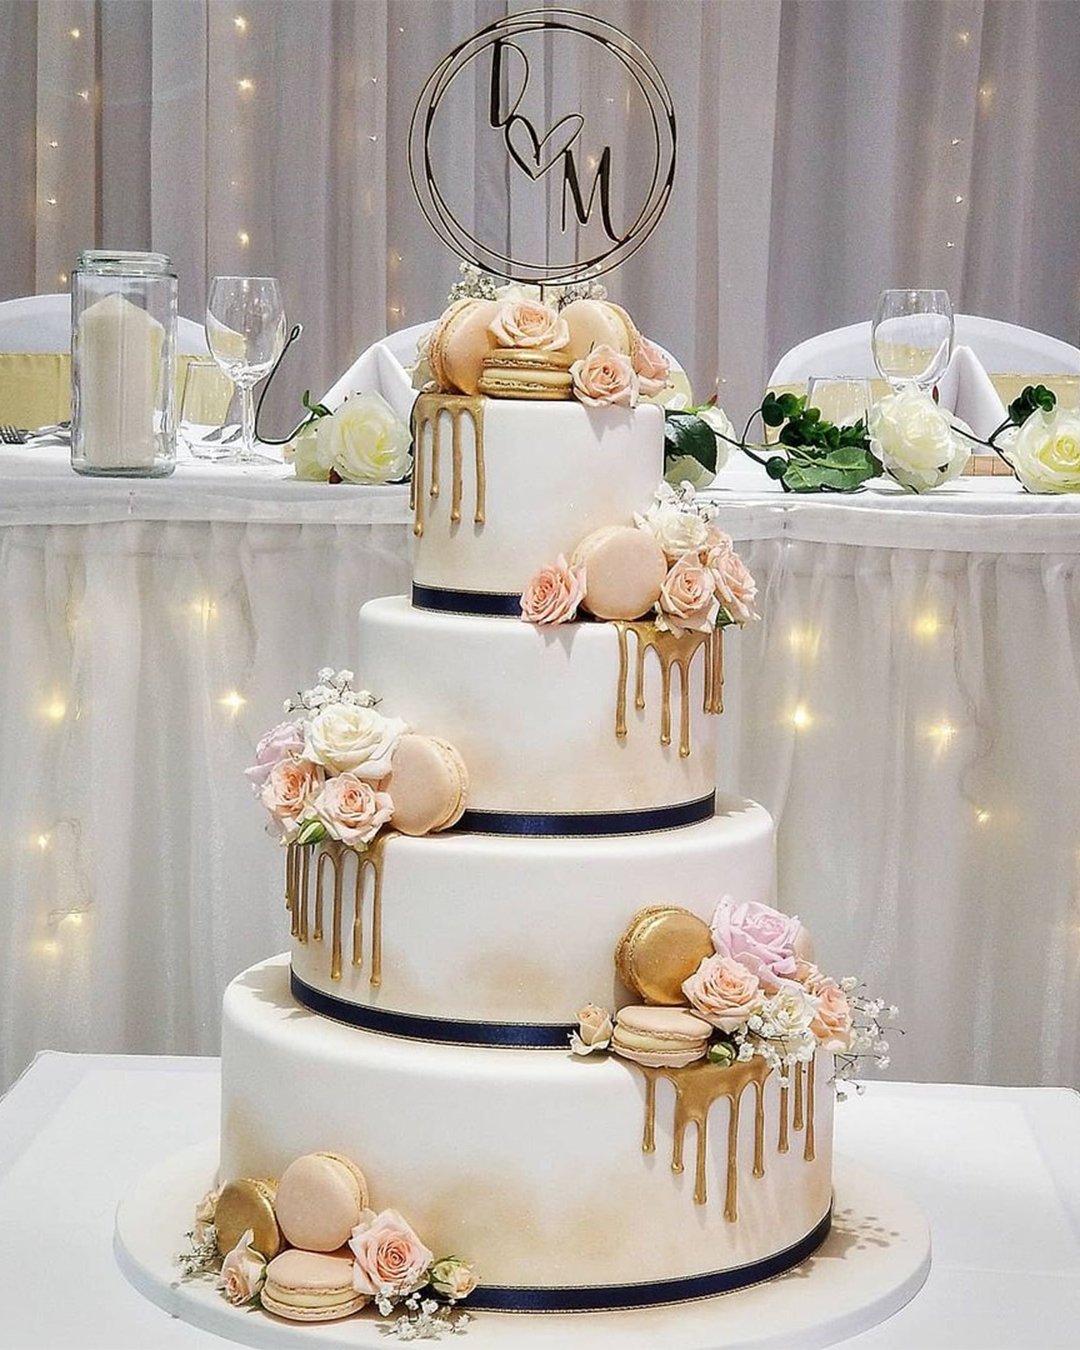 black and white wedding cakes elegant cakes with gold accents